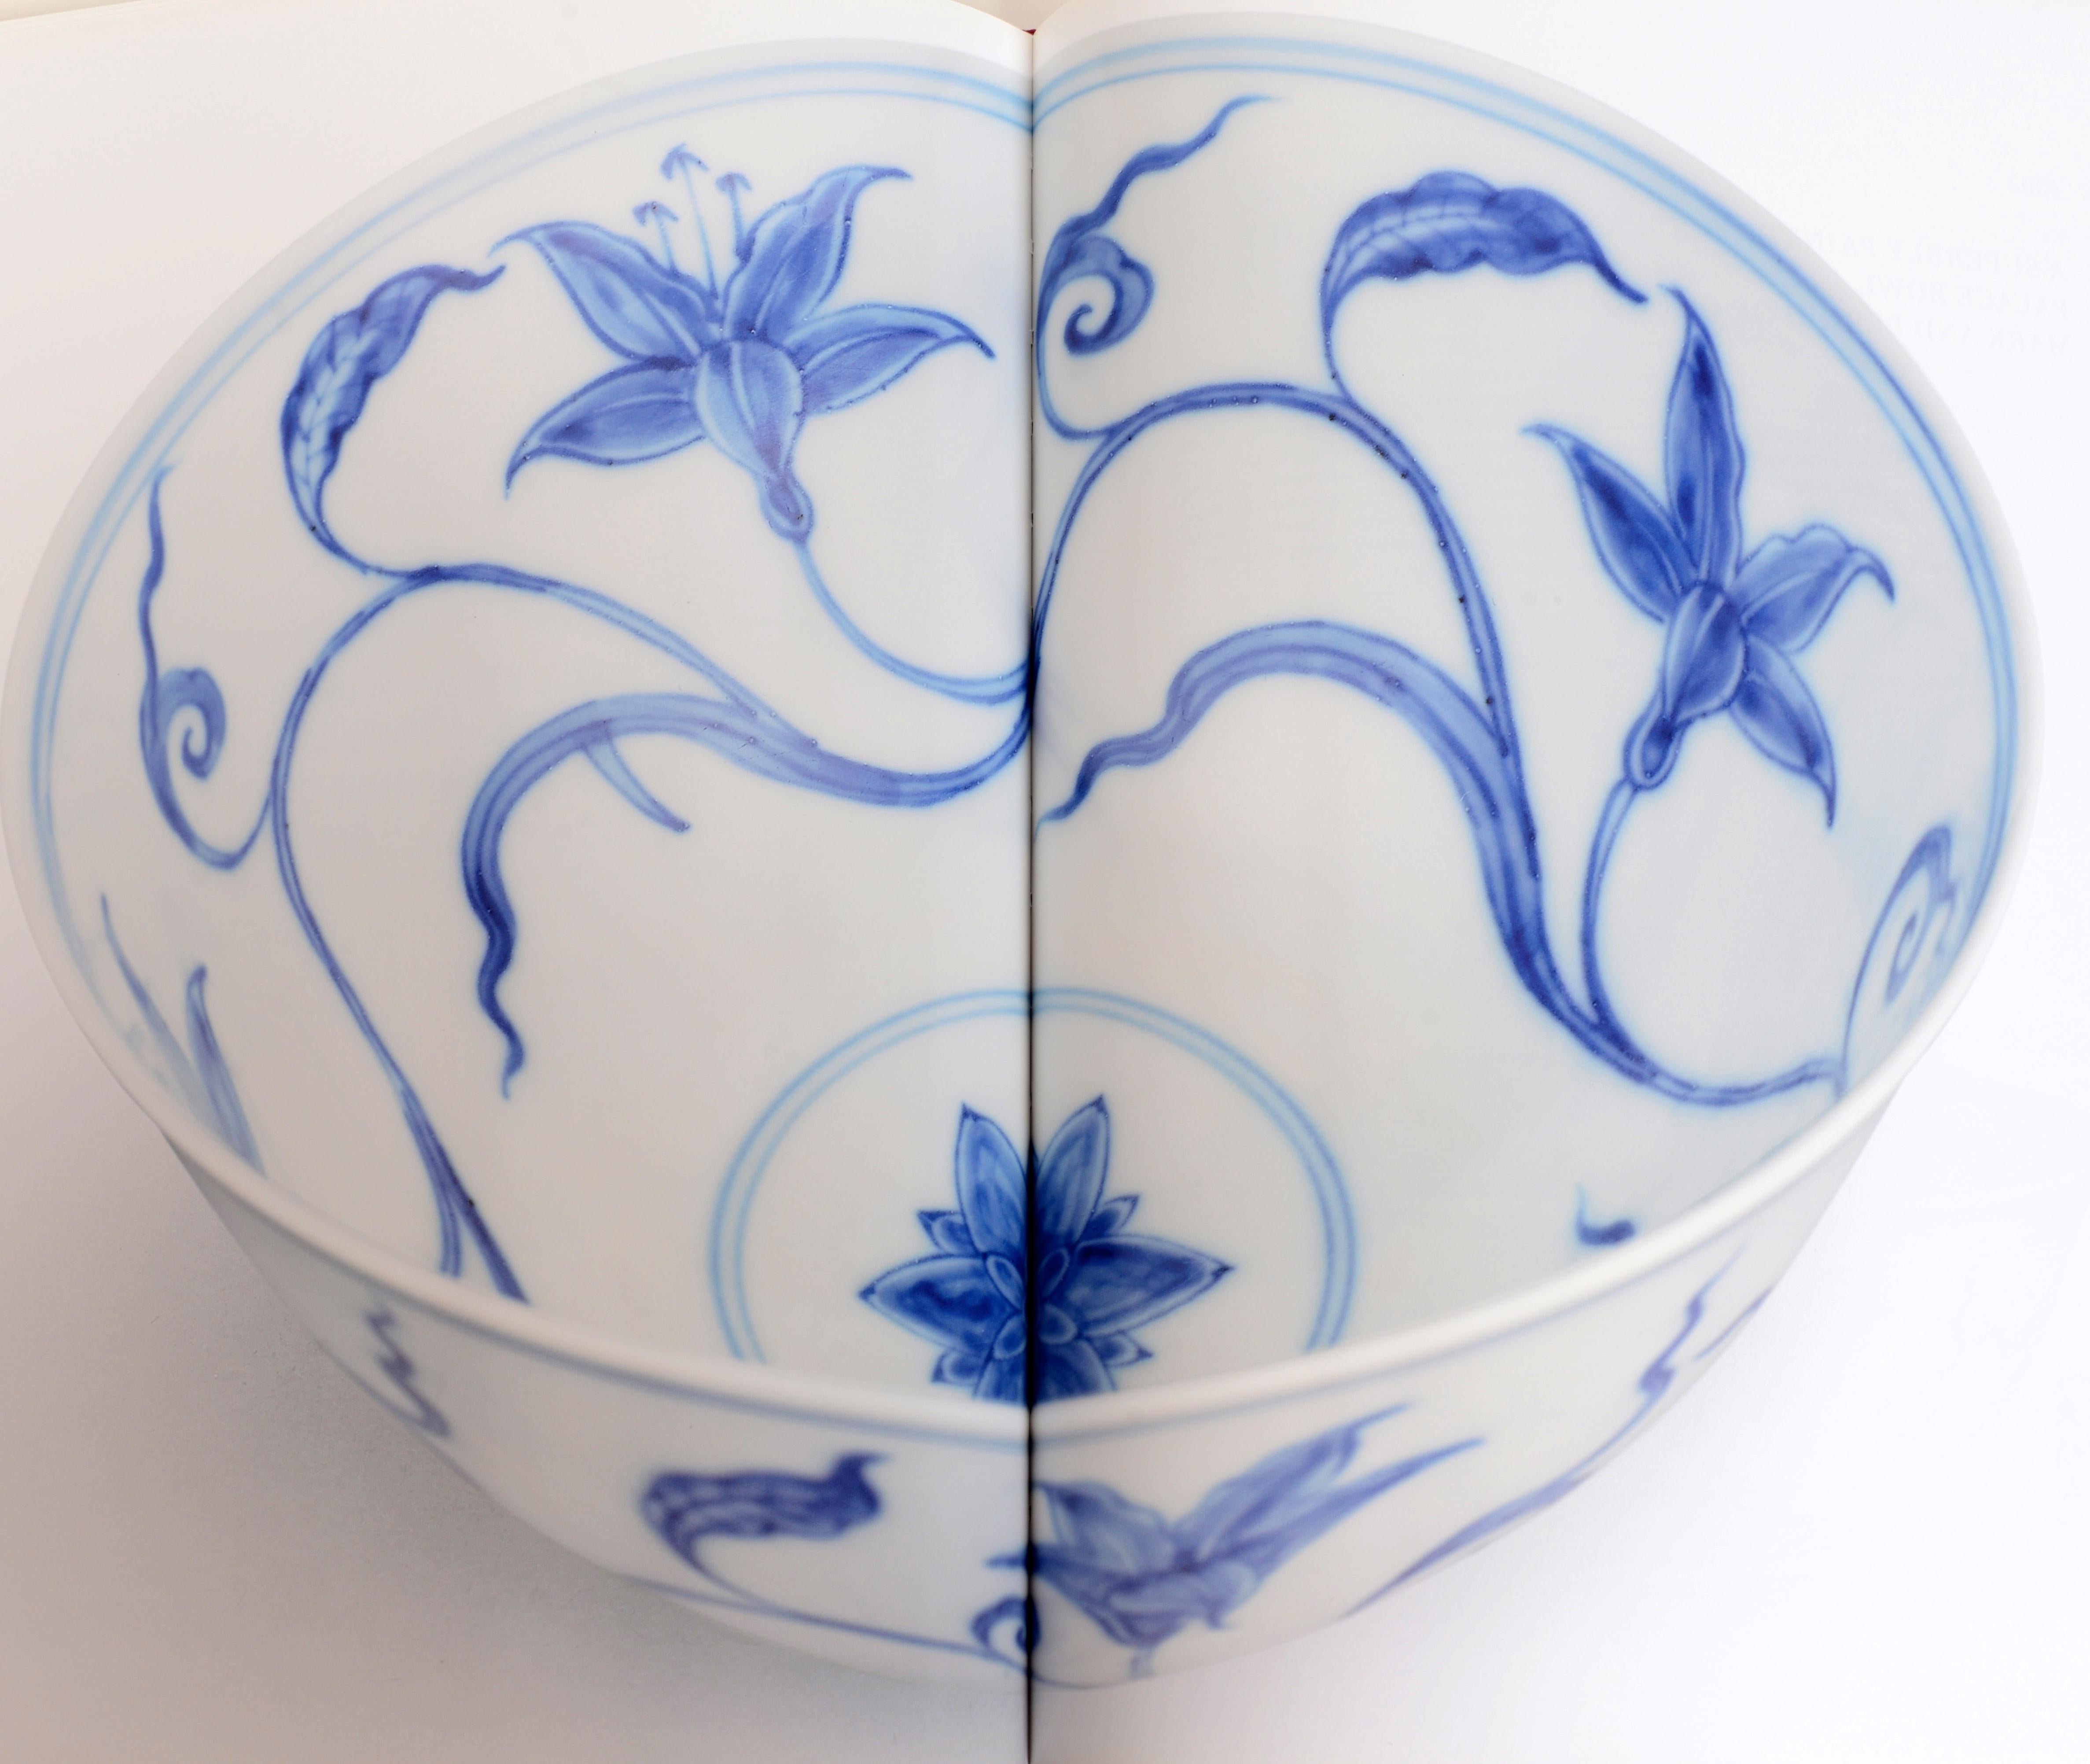 Chinese Two Ming Porcelain Masterpieces from an Important Collection Sotheby's Hong Kong For Sale